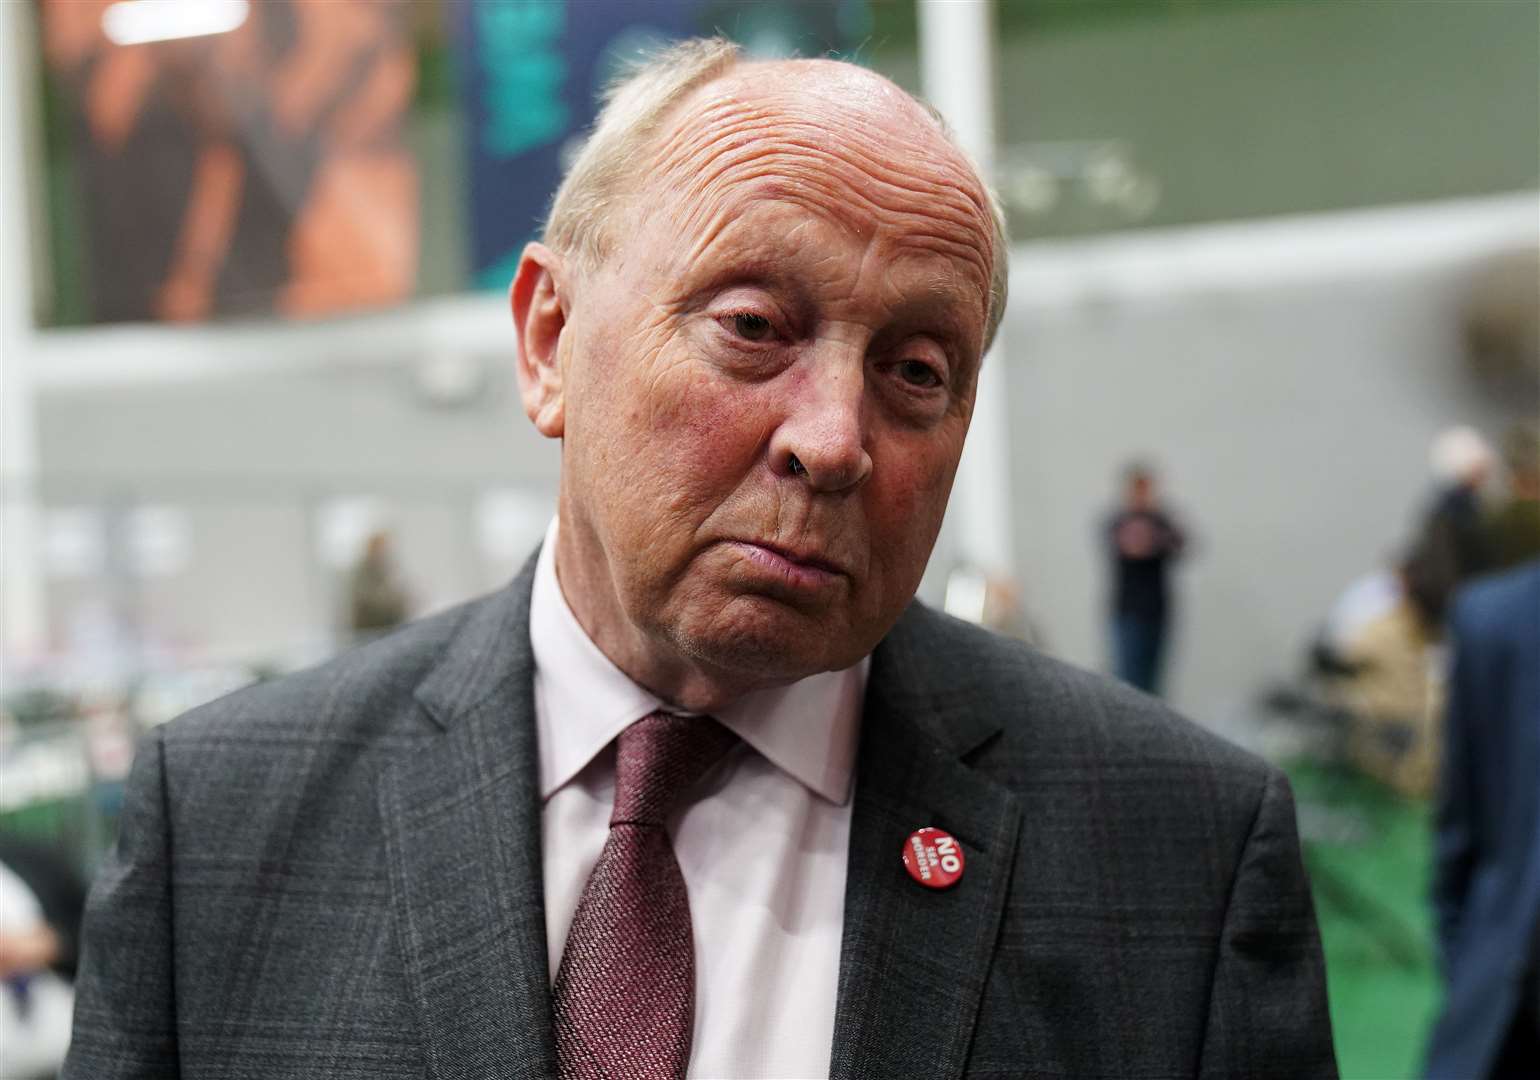 Traditional Unionist Voice party leader Jim Allister said the new PM would be judged by her actions (Brian Lawless/PA)